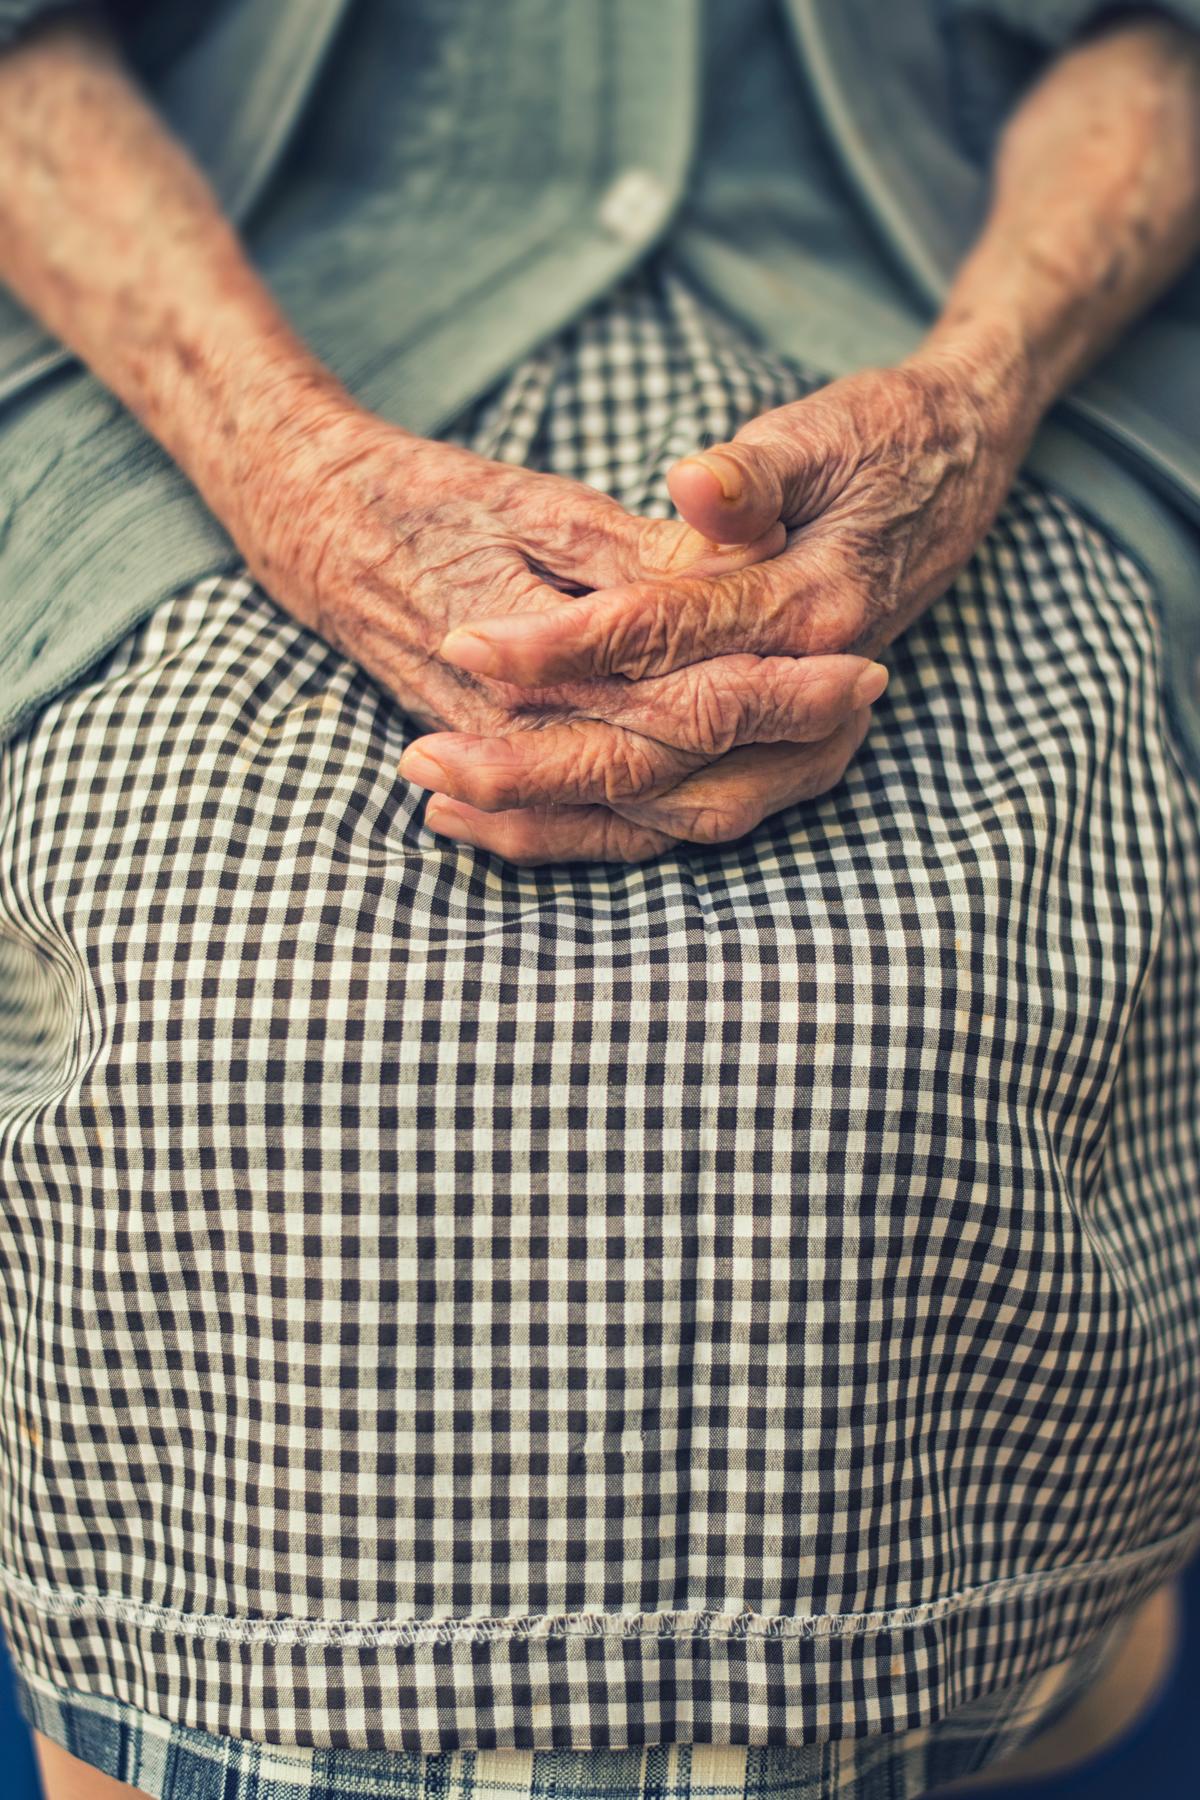 Close up of an elderly person's hands folded on their lap